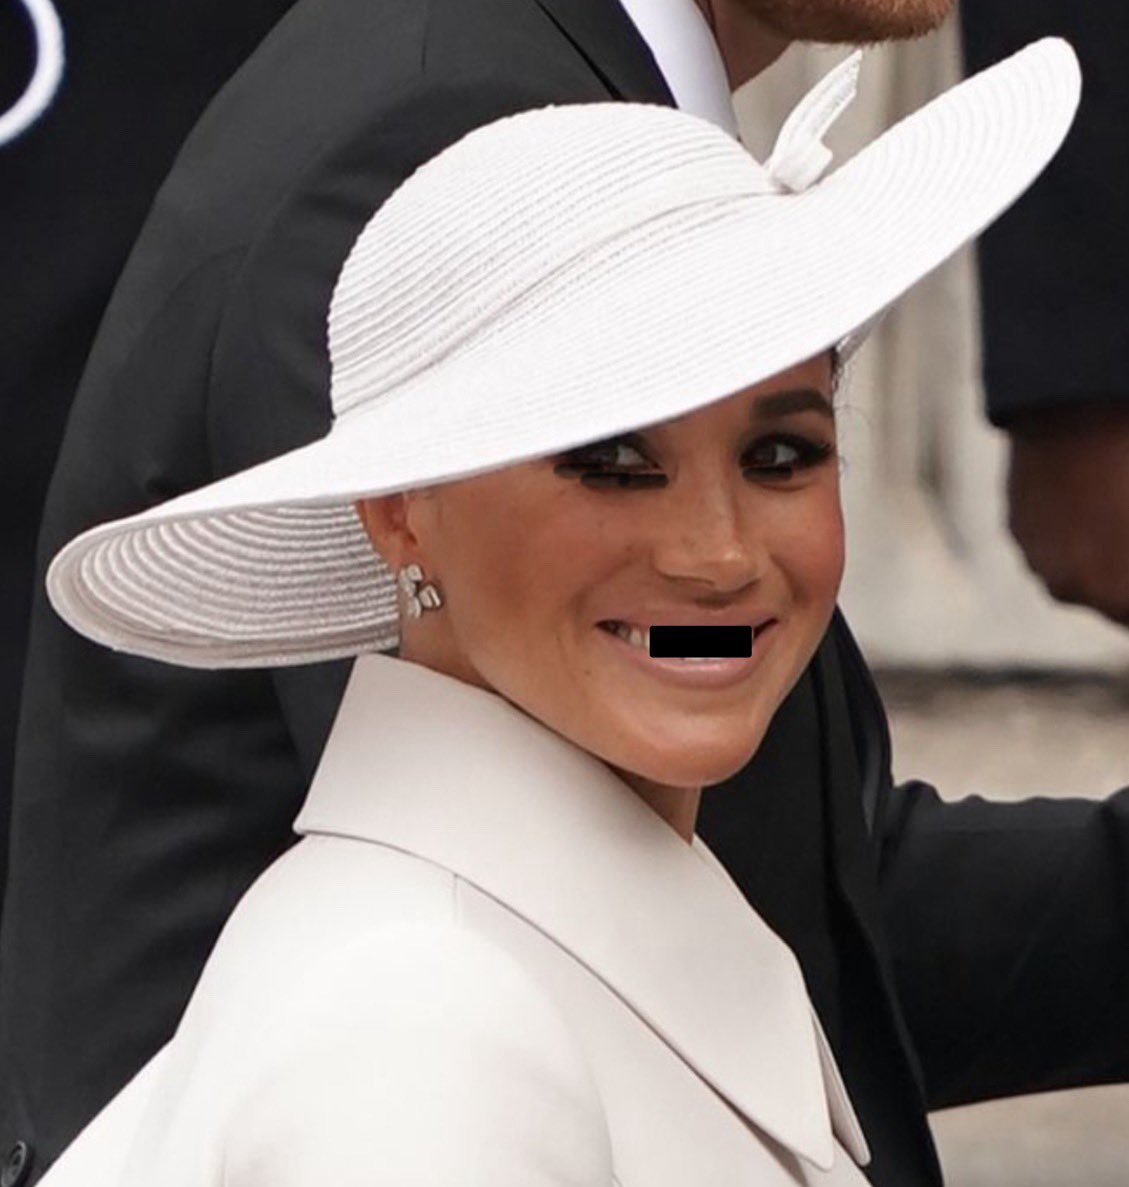 With that big collar and that big hat, she looks like she's as bald as H, @Kathy202424 🤭🤭😂😂🤣🤣🤣🤣 #MeghanMarkleEXPOSED #MeghanMarkleIsAConArtist #MeghanAndHarryAreEmbarrassing #MeghanMarkleAmerianPsycho #MeghanMarkleIsABully #Harkles #FOMeghanAndHarry